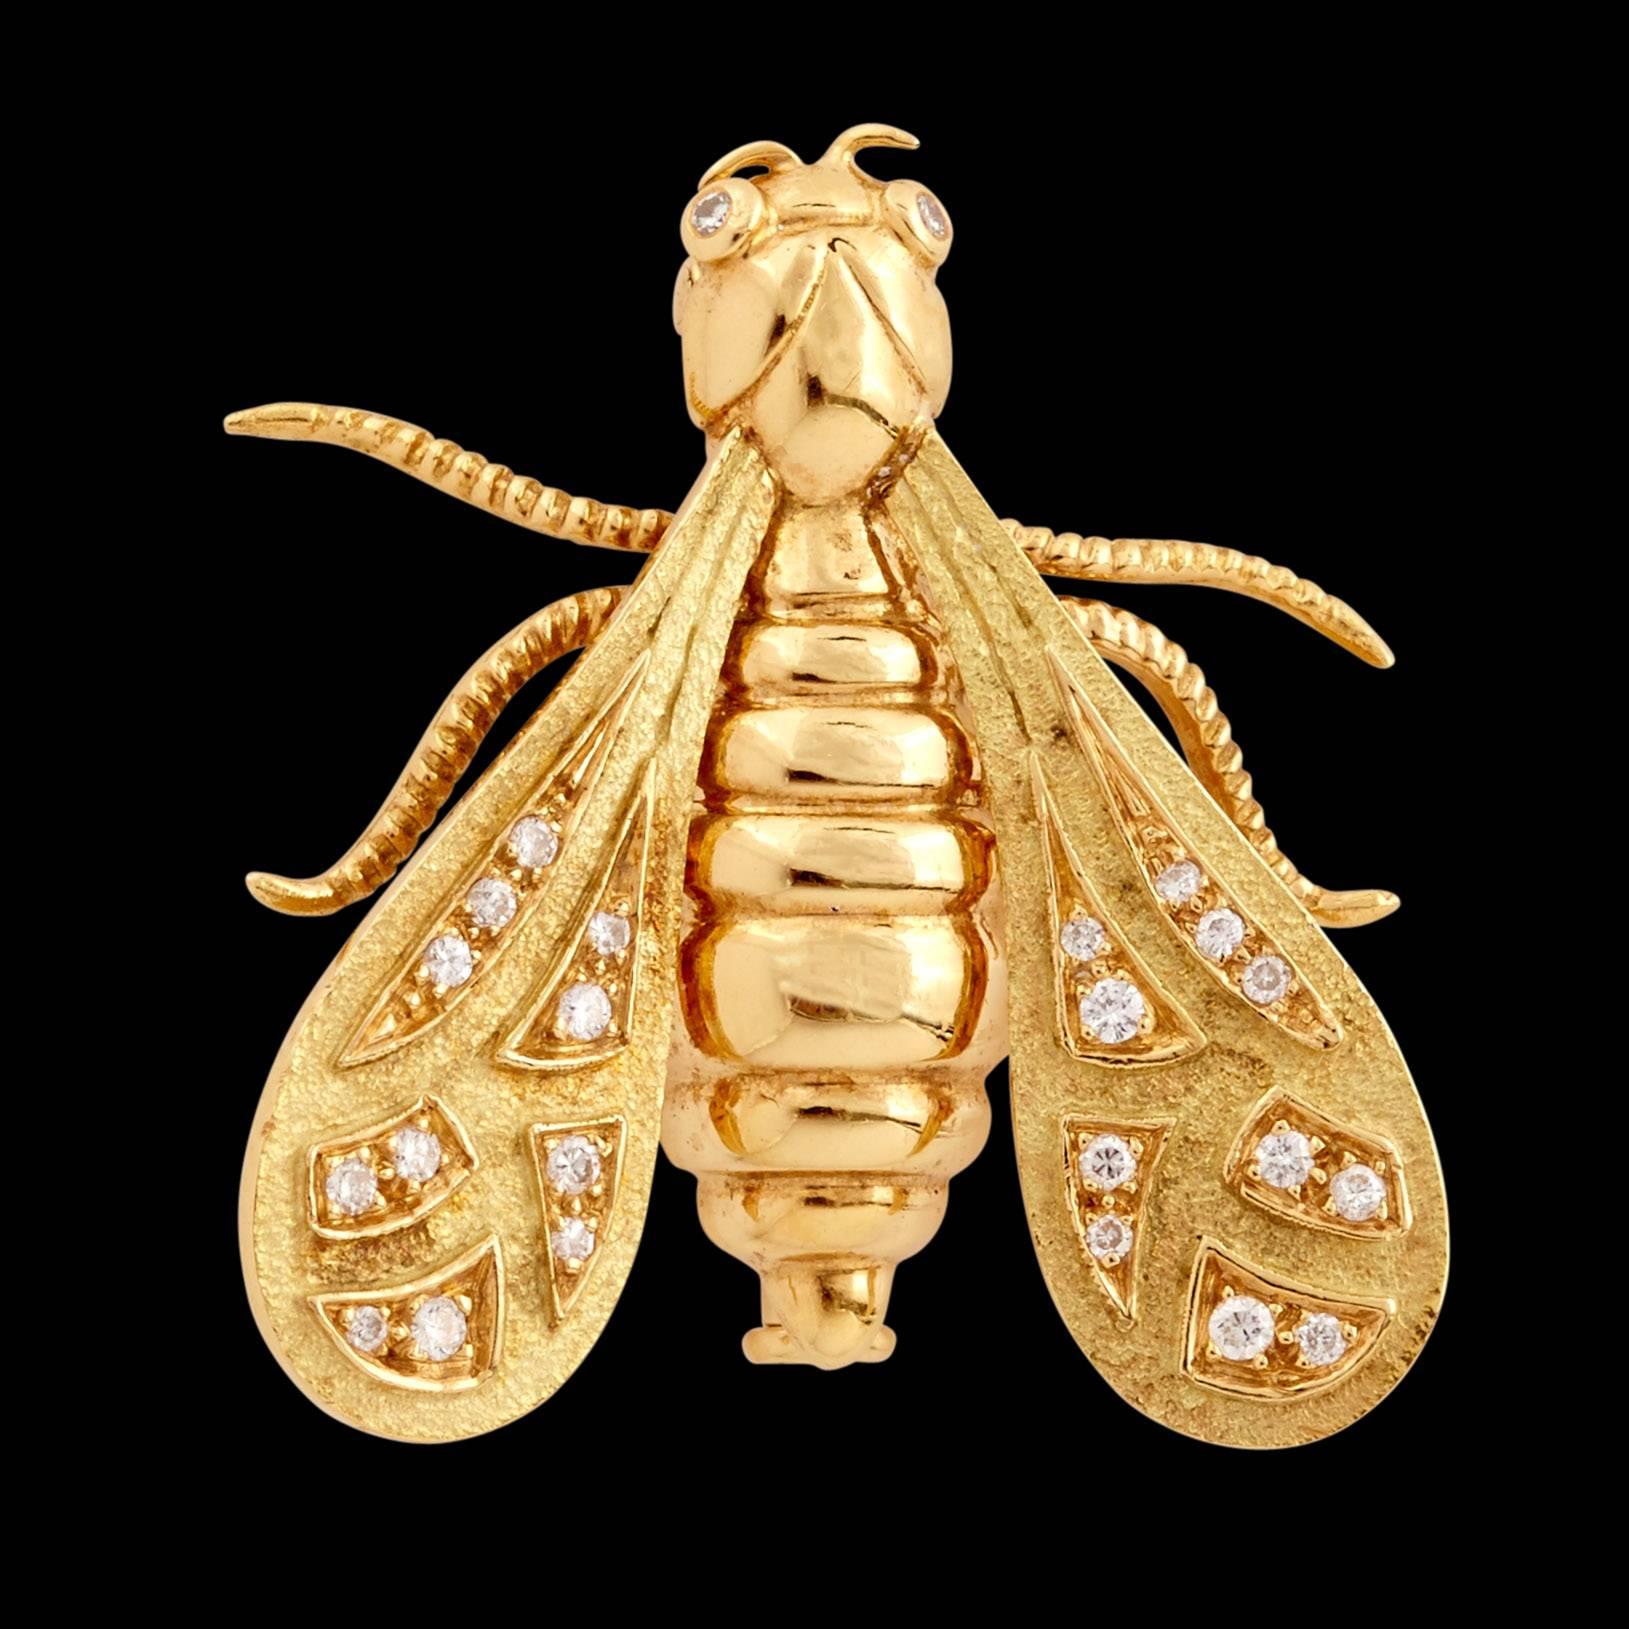 Chaumet 18Kt Yellow Gold Bee Pin is Detailed with 24 Round Brilliant Cut Diamonds on its Wings, Totaling Approximately 0.20 Carats. This pin measures 1 inch in diameter & weighs 6.2 grams. A Certificate of Authenticity with individual serial number